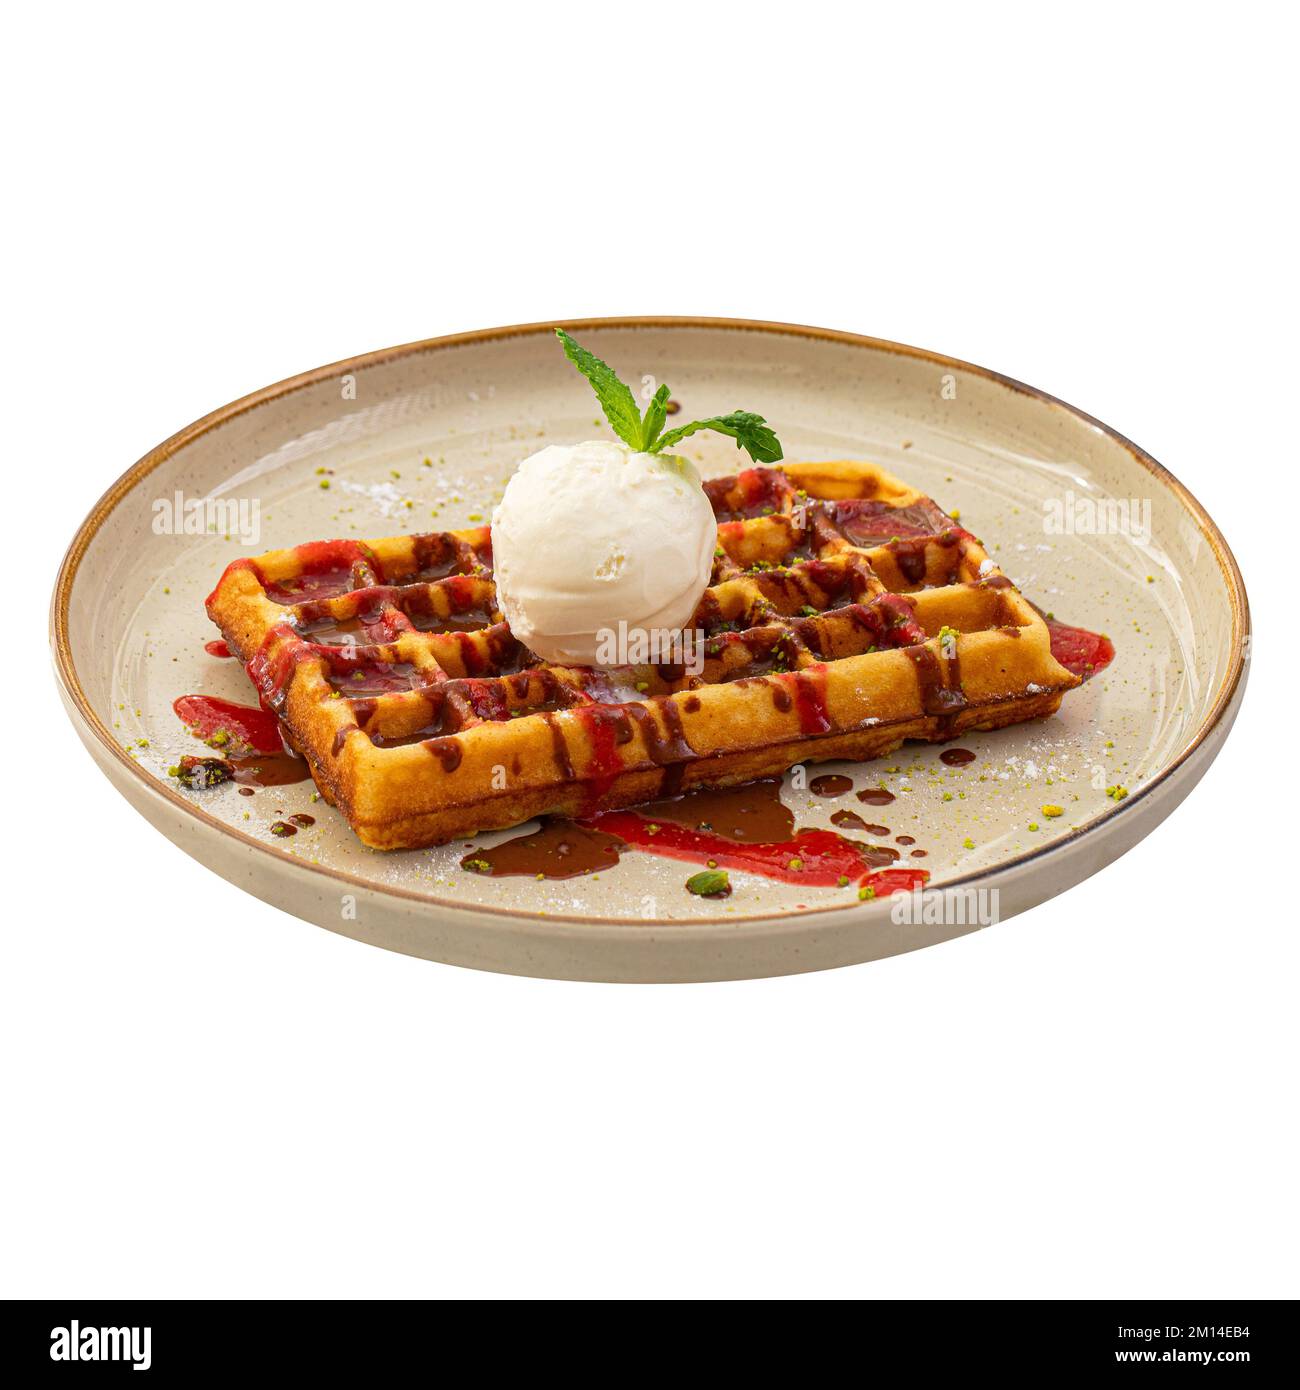 Portion of sweet belgian waffles with ice cream Stock Photo